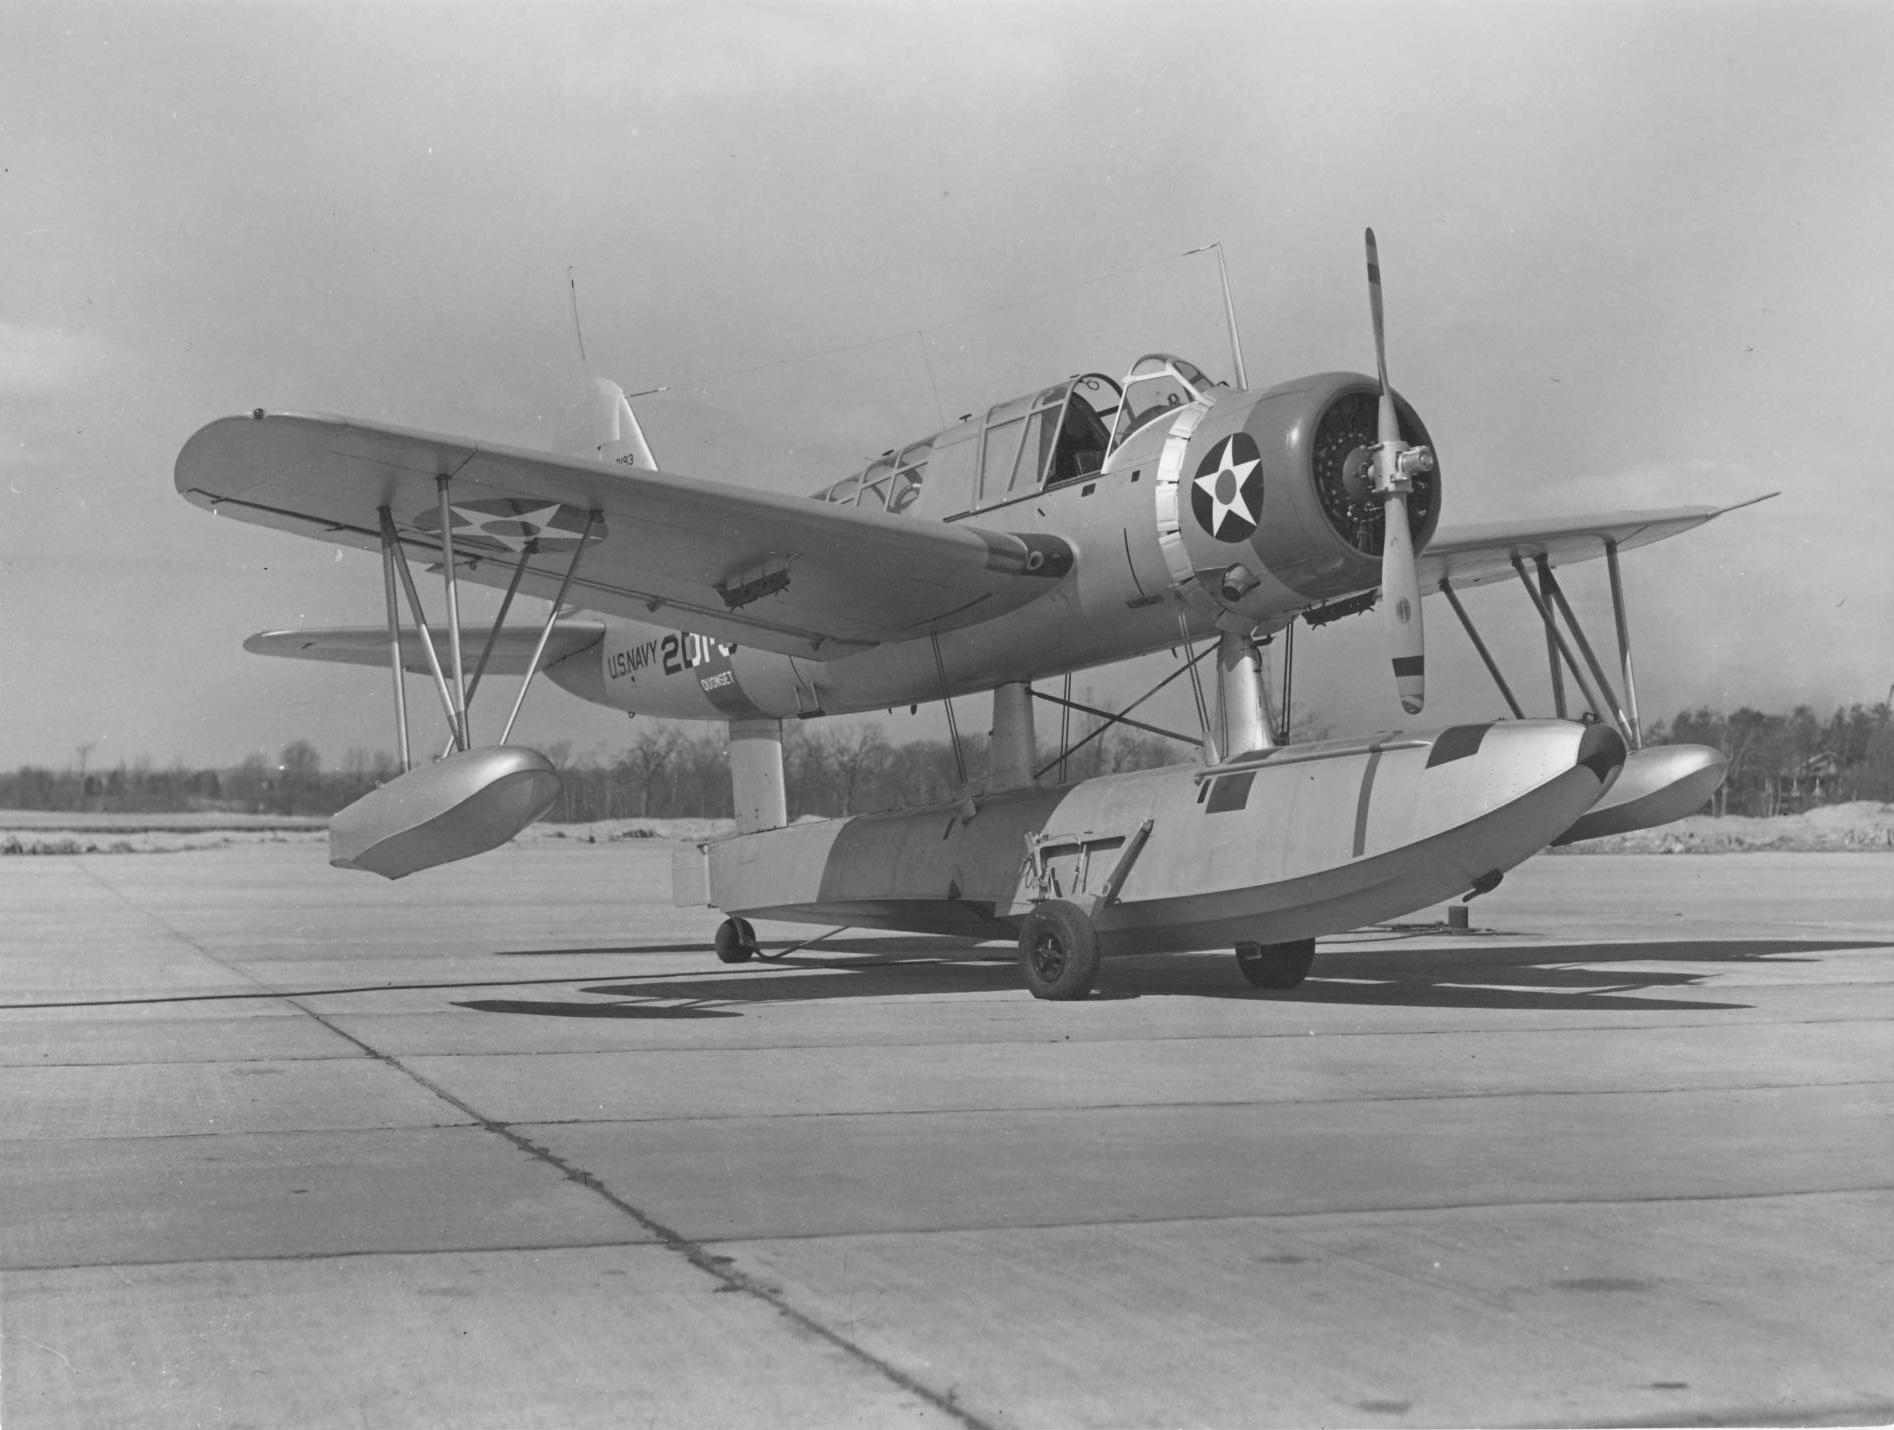 OS2U-2 Kingfisher of Scouting Squadron 2 on the seaplane ramp at NAS Quonset Point, Rhode Island, United States, Mar 20 1941. Photo 1 of 2